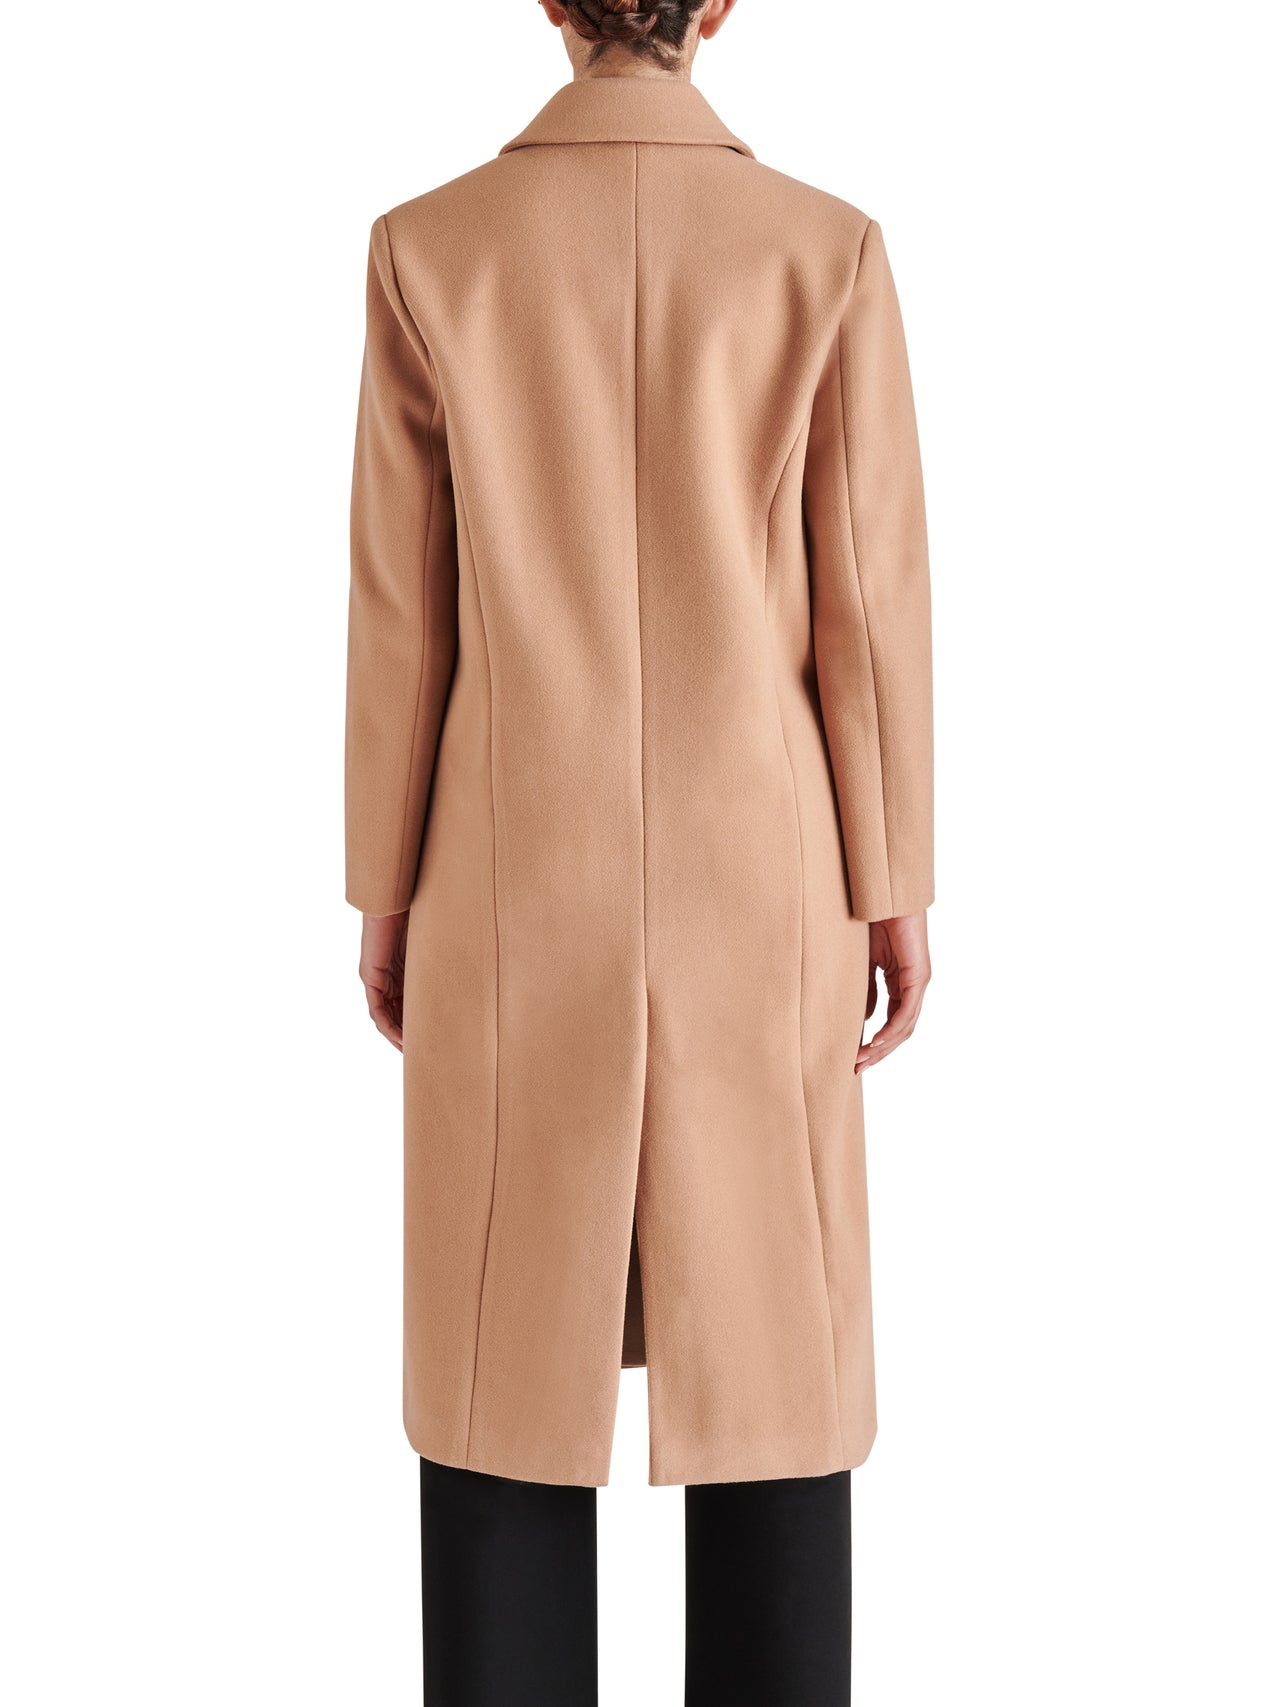 Nell Camel Double Breasted Coat With Vegan Leather Collar, Coat Jacket by Steve Madden | LIT Boutique